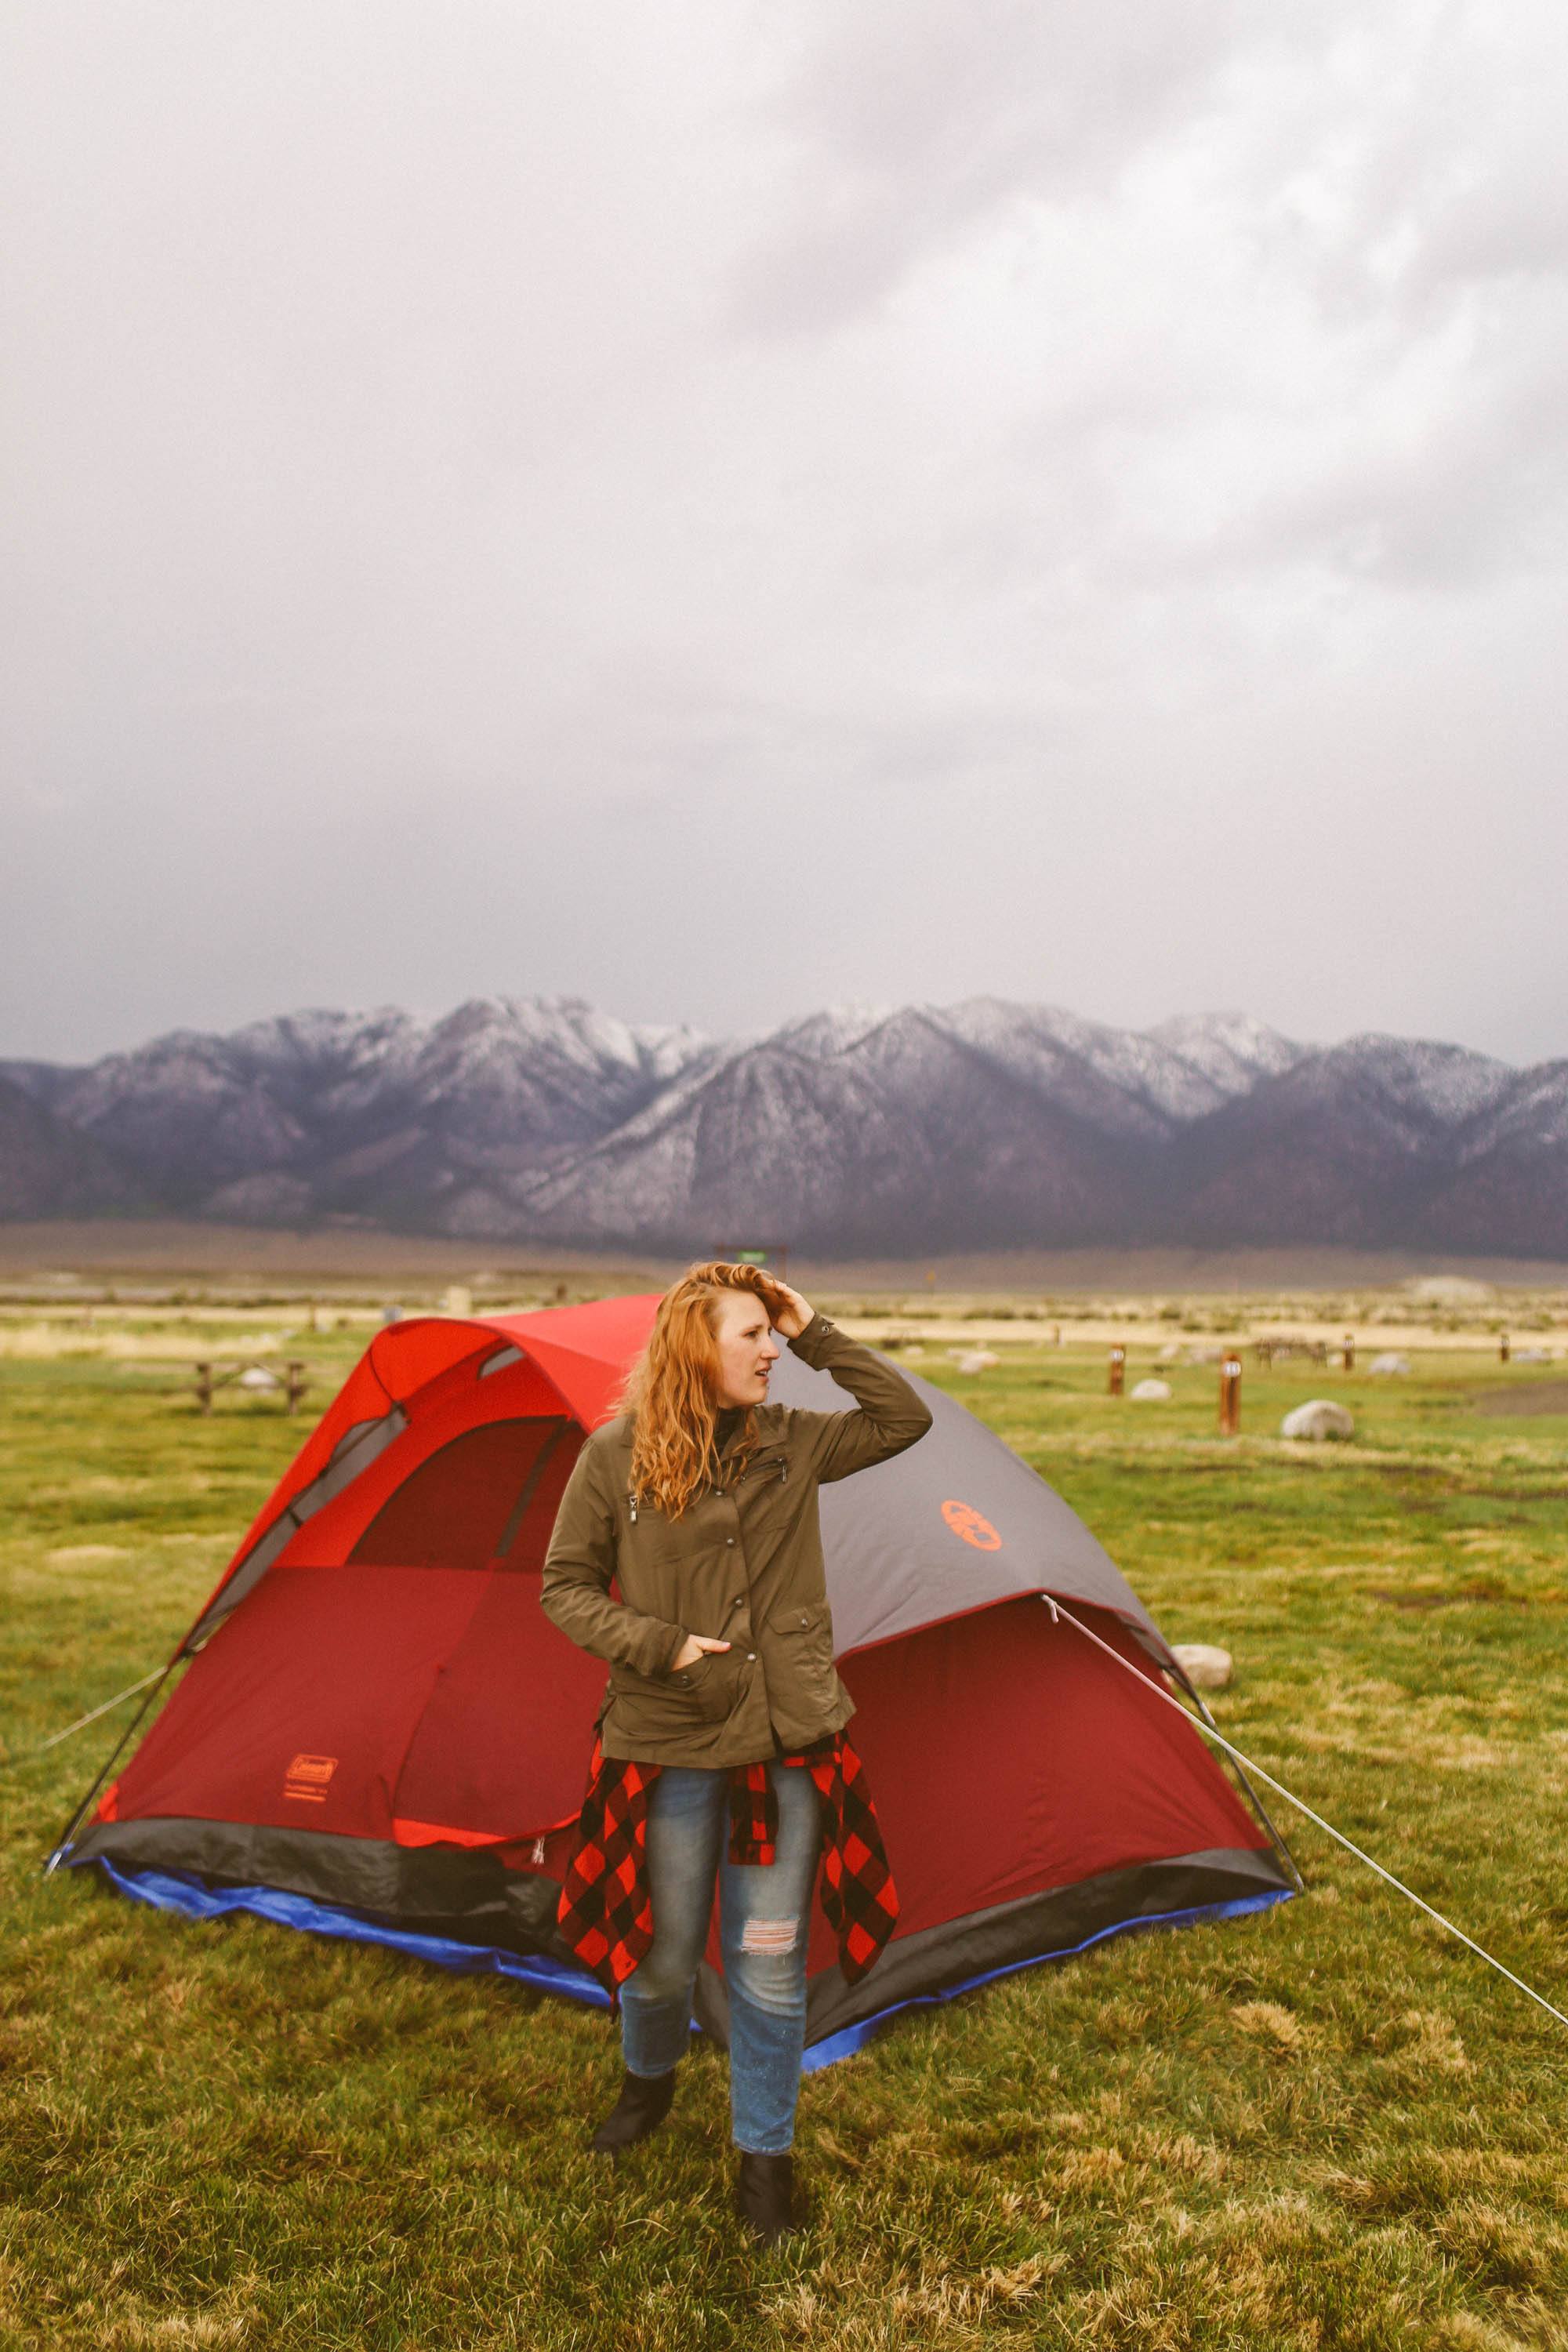 Woman standing in front of tent with mountains in the background